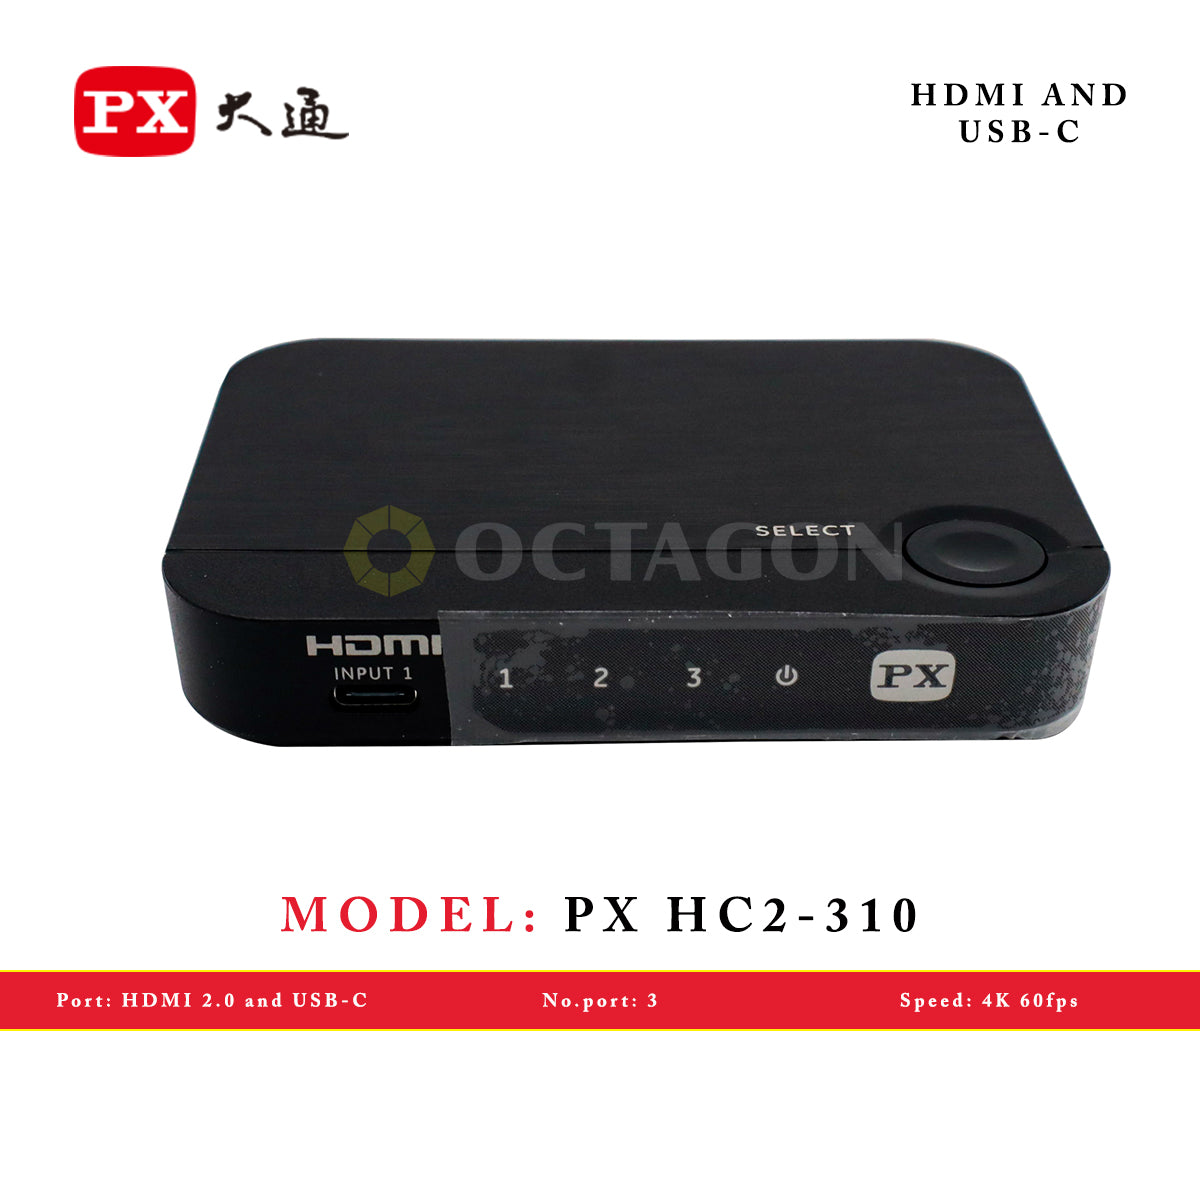 PX HC2-310 HDMI AND USB-C (3 INPUT 1 OUTPUT)